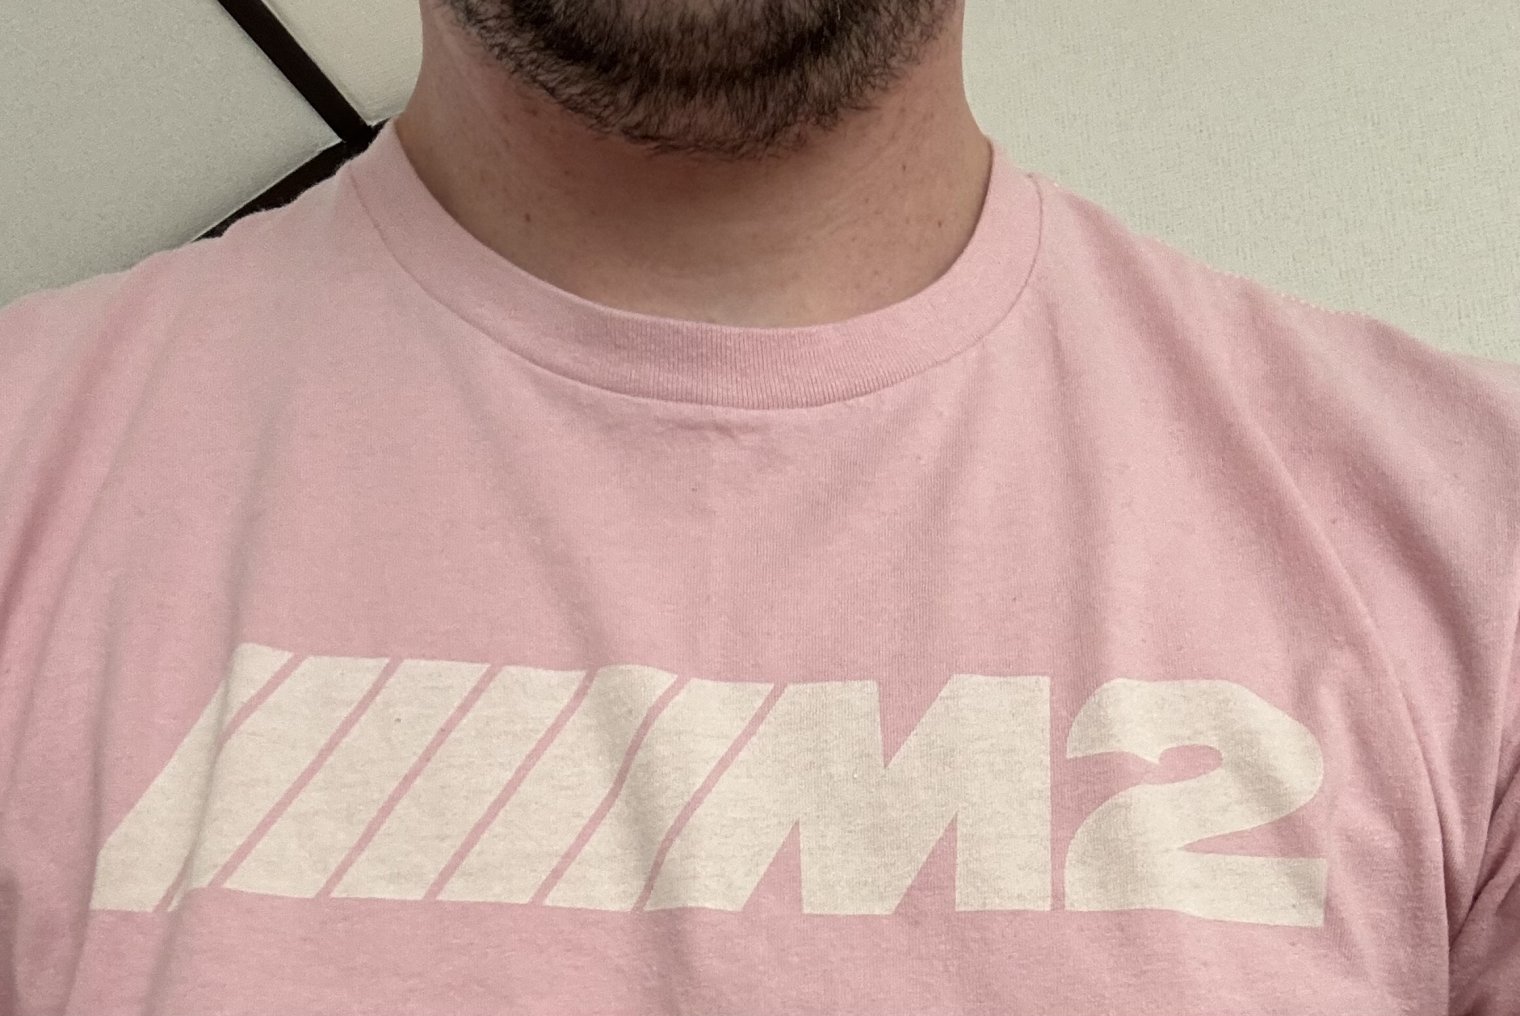 A pretty garbage photo of Garion’s pink M2 shirt and also his chin